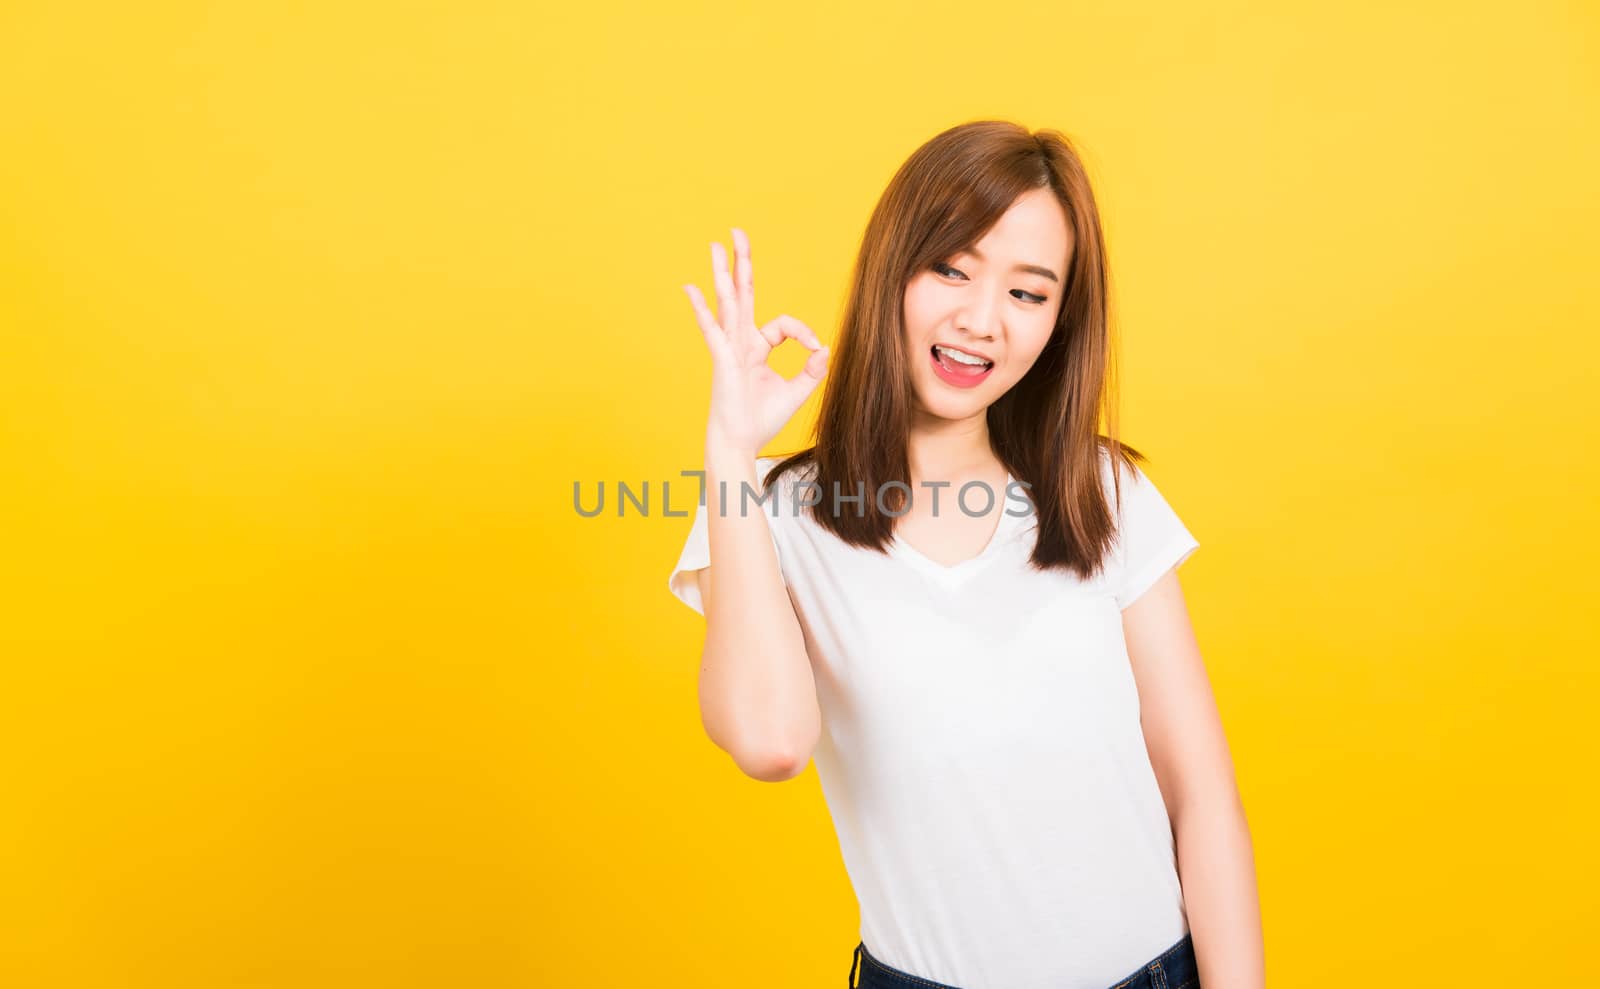 Asian happy portrait beautiful cute young woman teen standing wear t-shirt showing gesturing ok sign with fingers looking to side isolated, studio shot on yellow background with copy space for text